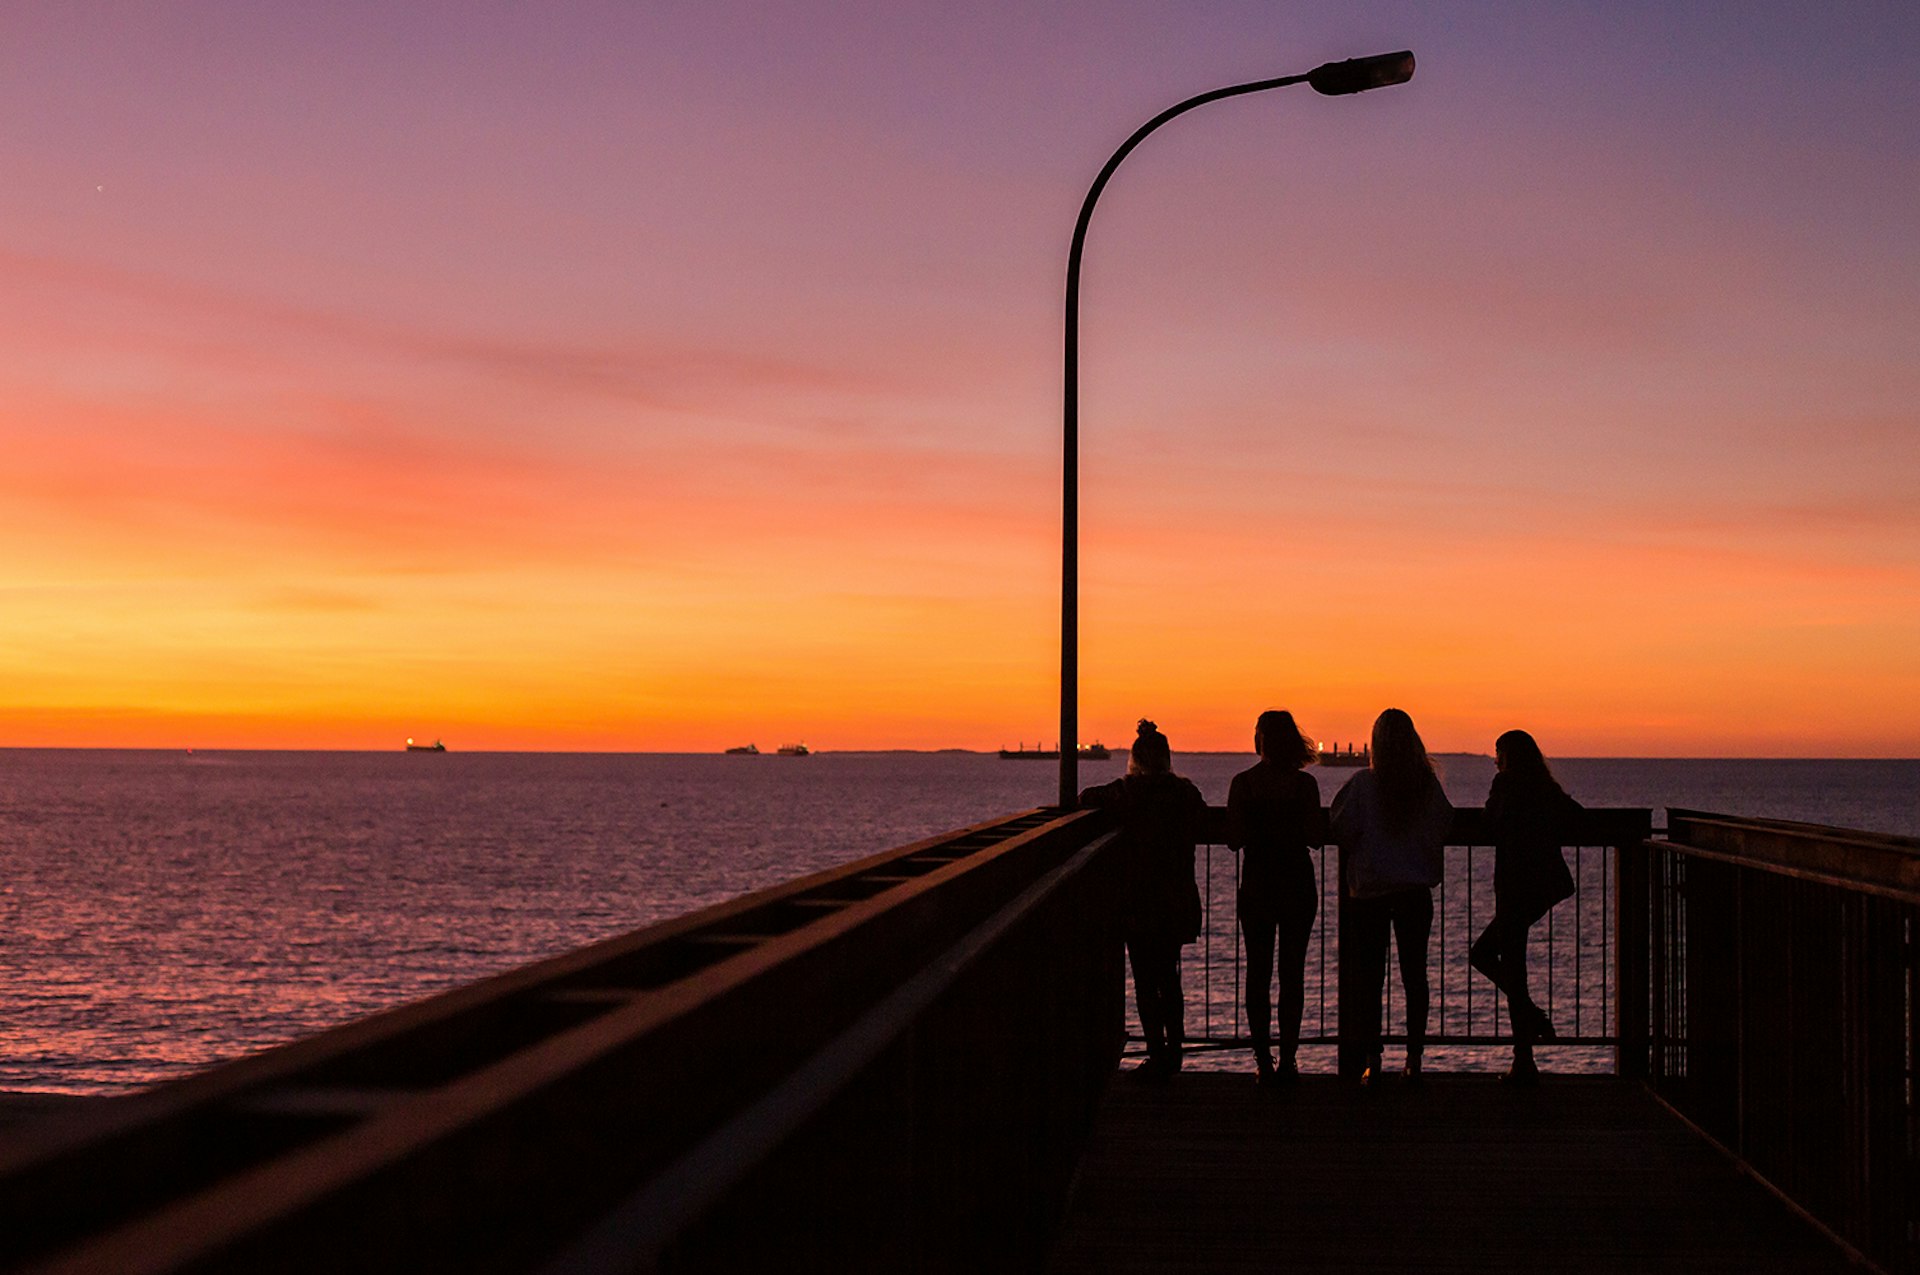 A copper-tinted sunset is the perfect way to finish a day in Fremantle. Image by Julian Lennon / CC BY 2.0